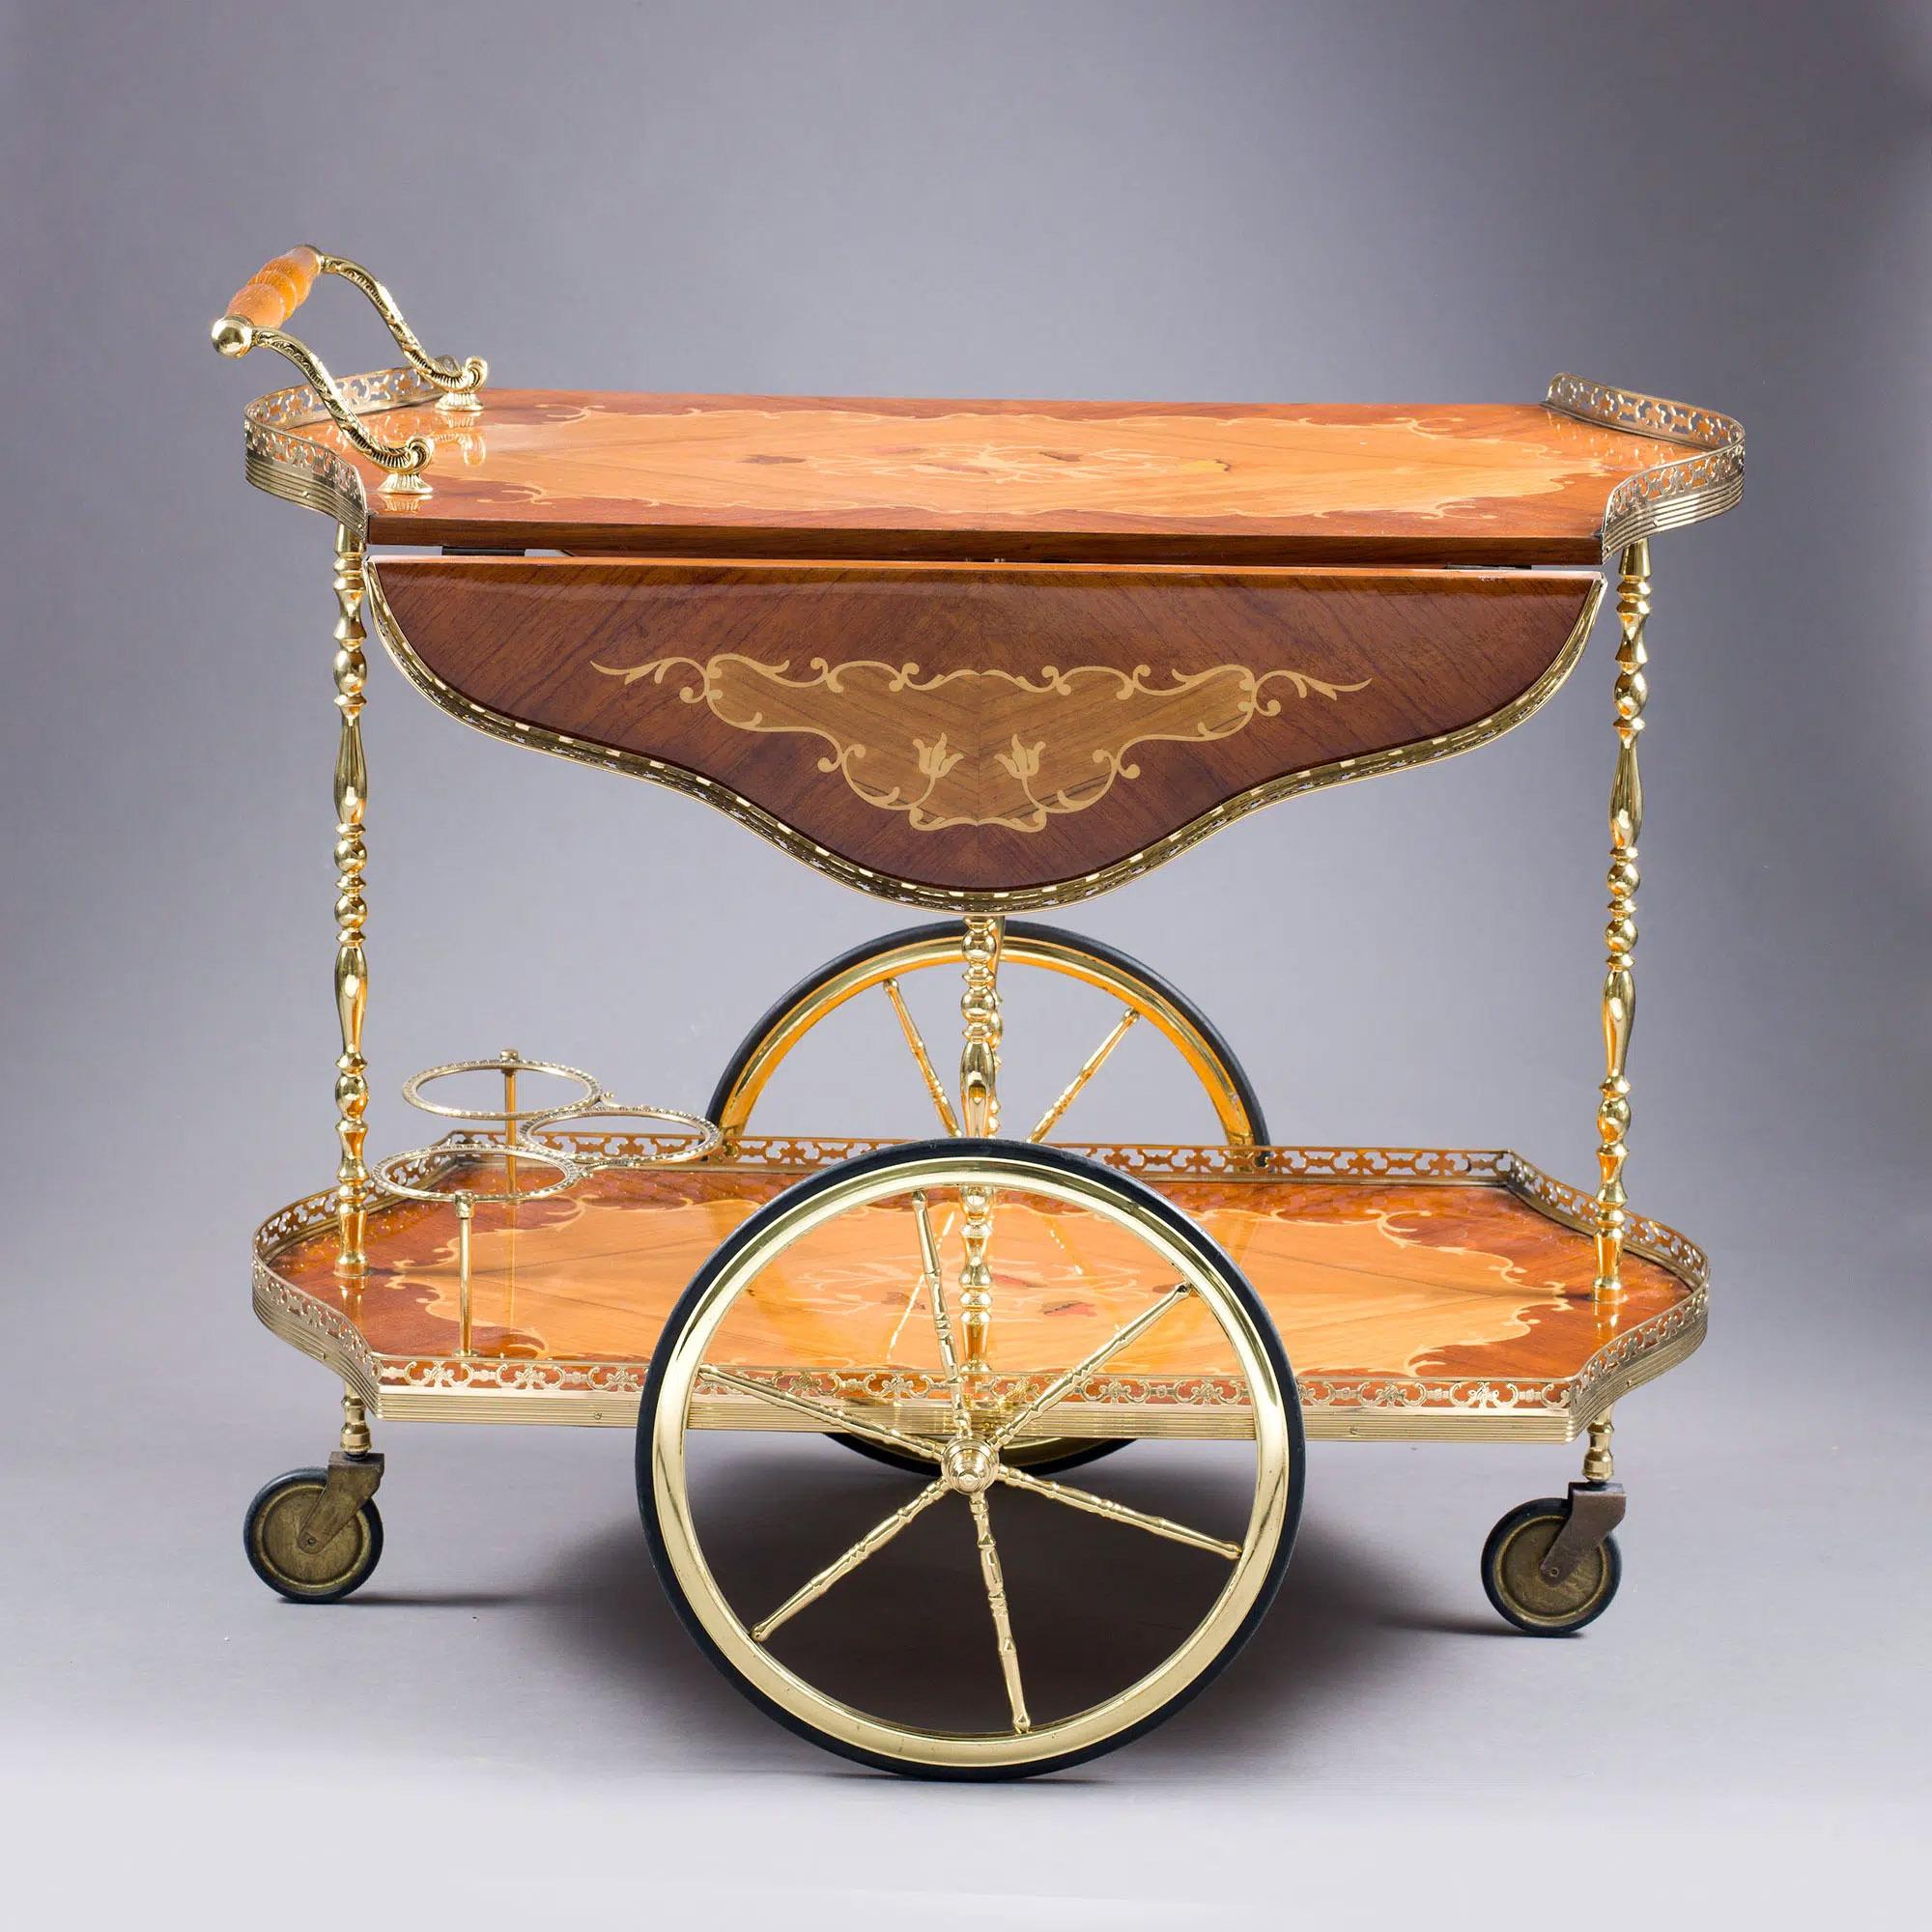 Mid-20th century marquetry and polished brass drinks trolley, the upper tray with inlaid marquetry drop-leaves and pierced brass gallery, supported on lathe-turned solid brass legs, the lower level with marquetry tray and brass gallery, large